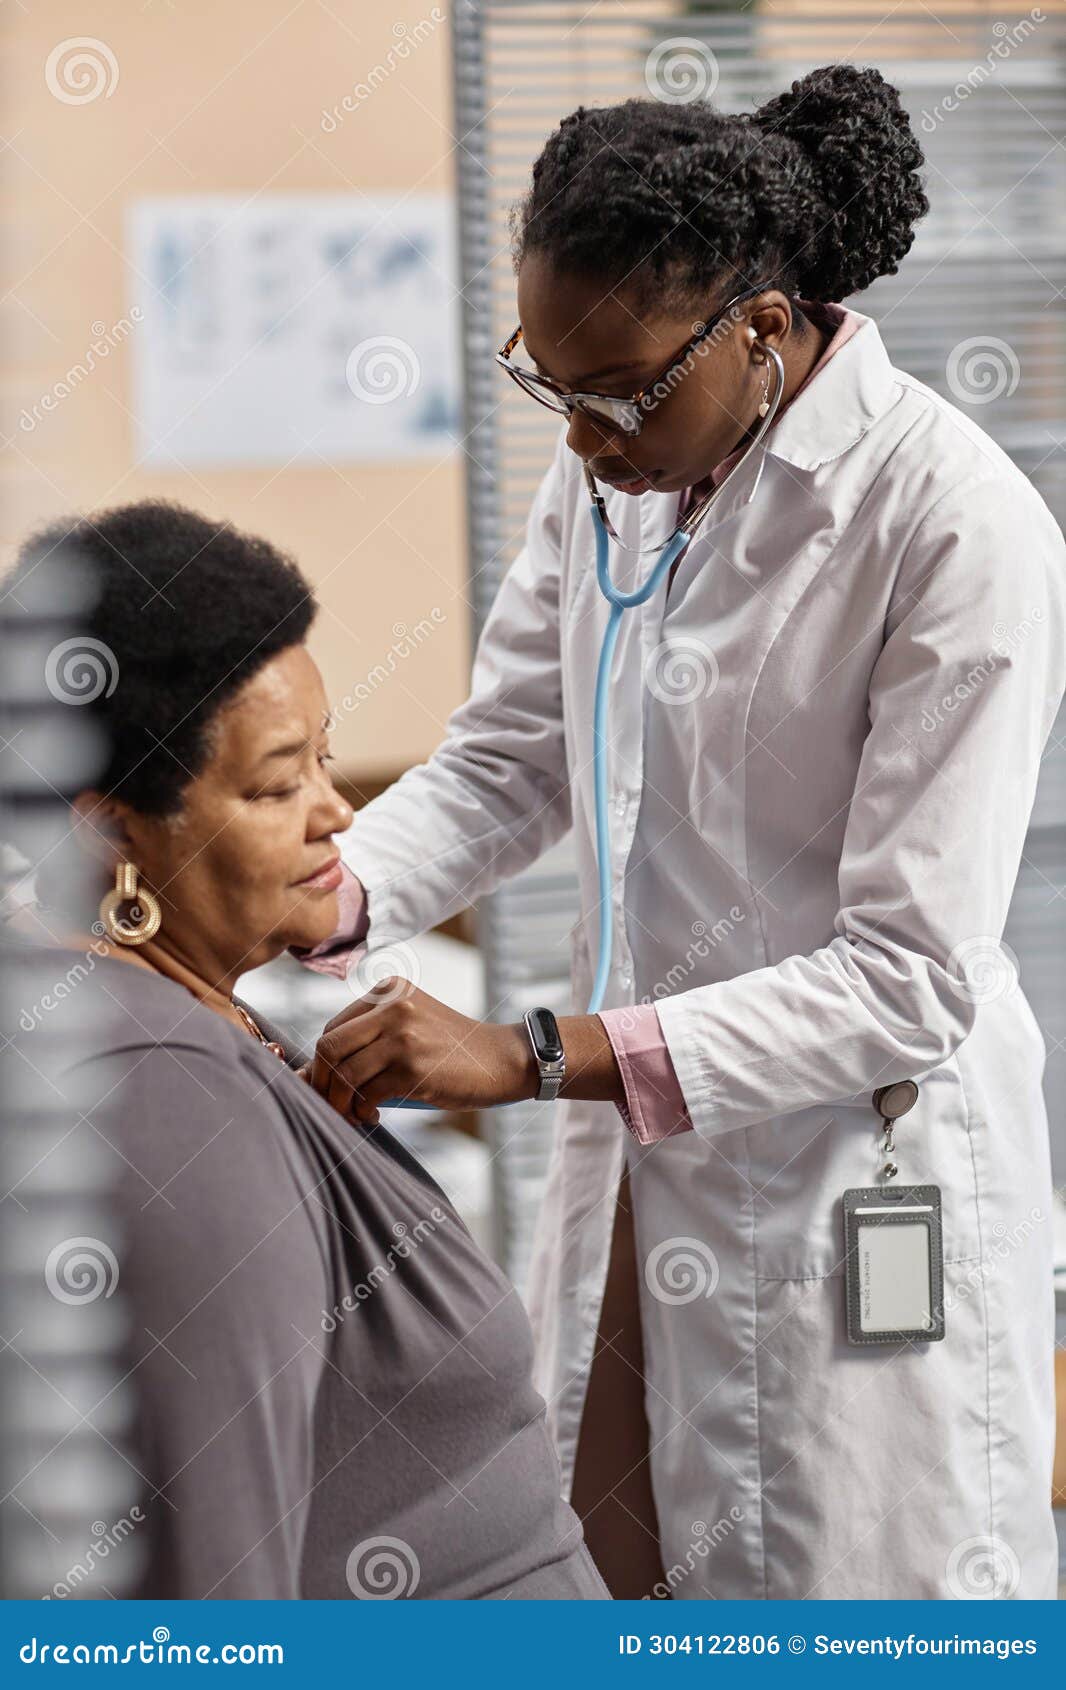 young female doctor conducting auscultation